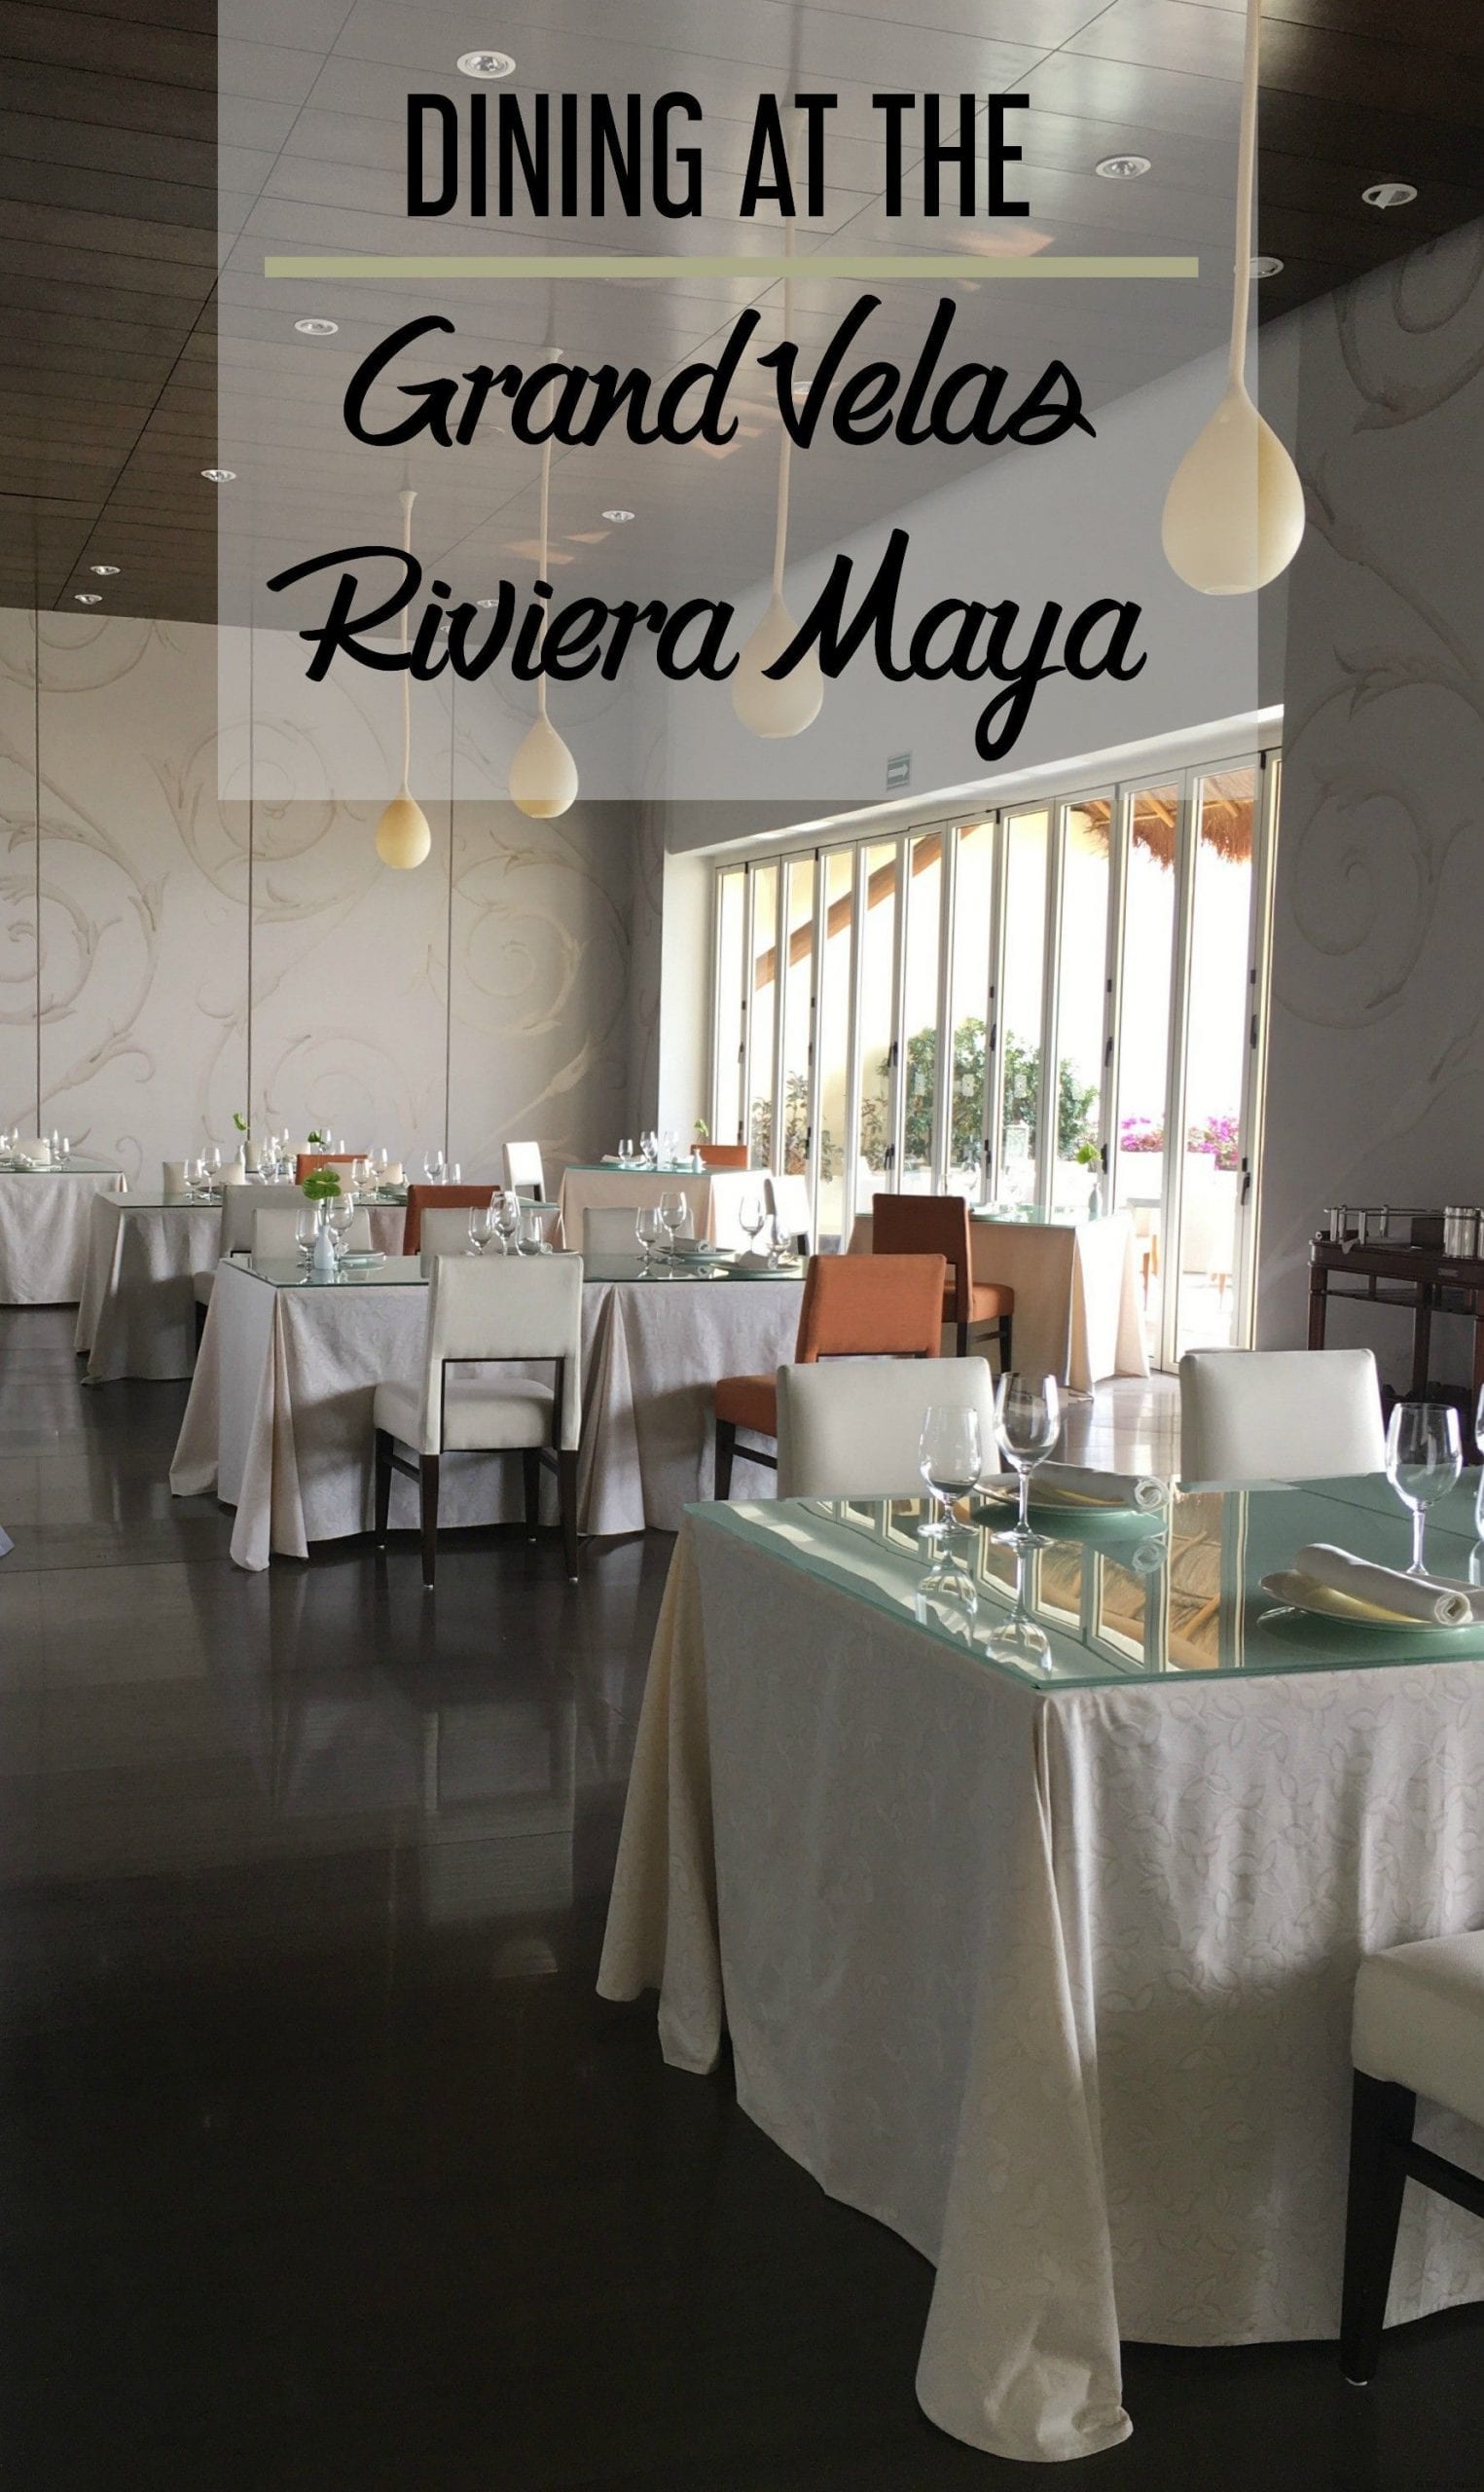 Dining at the Grand Velas Riviera Maya -- we break down all the different dining options at this all-inclusive luxury resorts in the Riviera Maya, Mexico with restaurant reviews to help you decide where to eat during your stay.